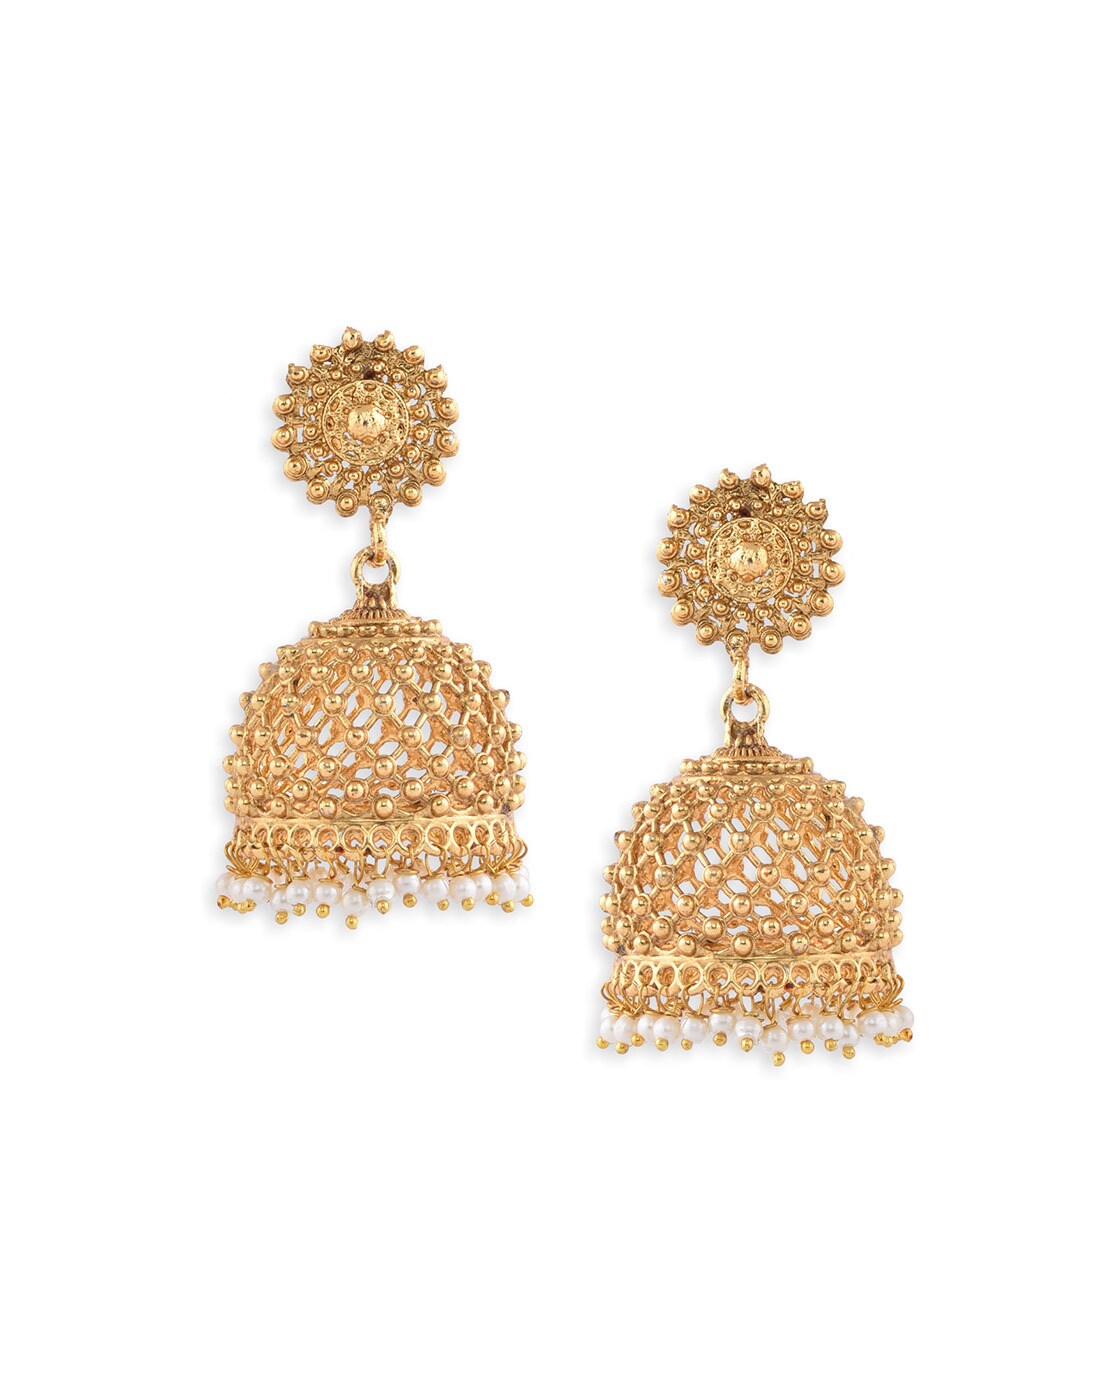 Buy Mirraw White Earrings For Womens & Girls - For All Occasion Online at  Lowest Price Ever in India | Check Reviews & Ratings - Shop The World